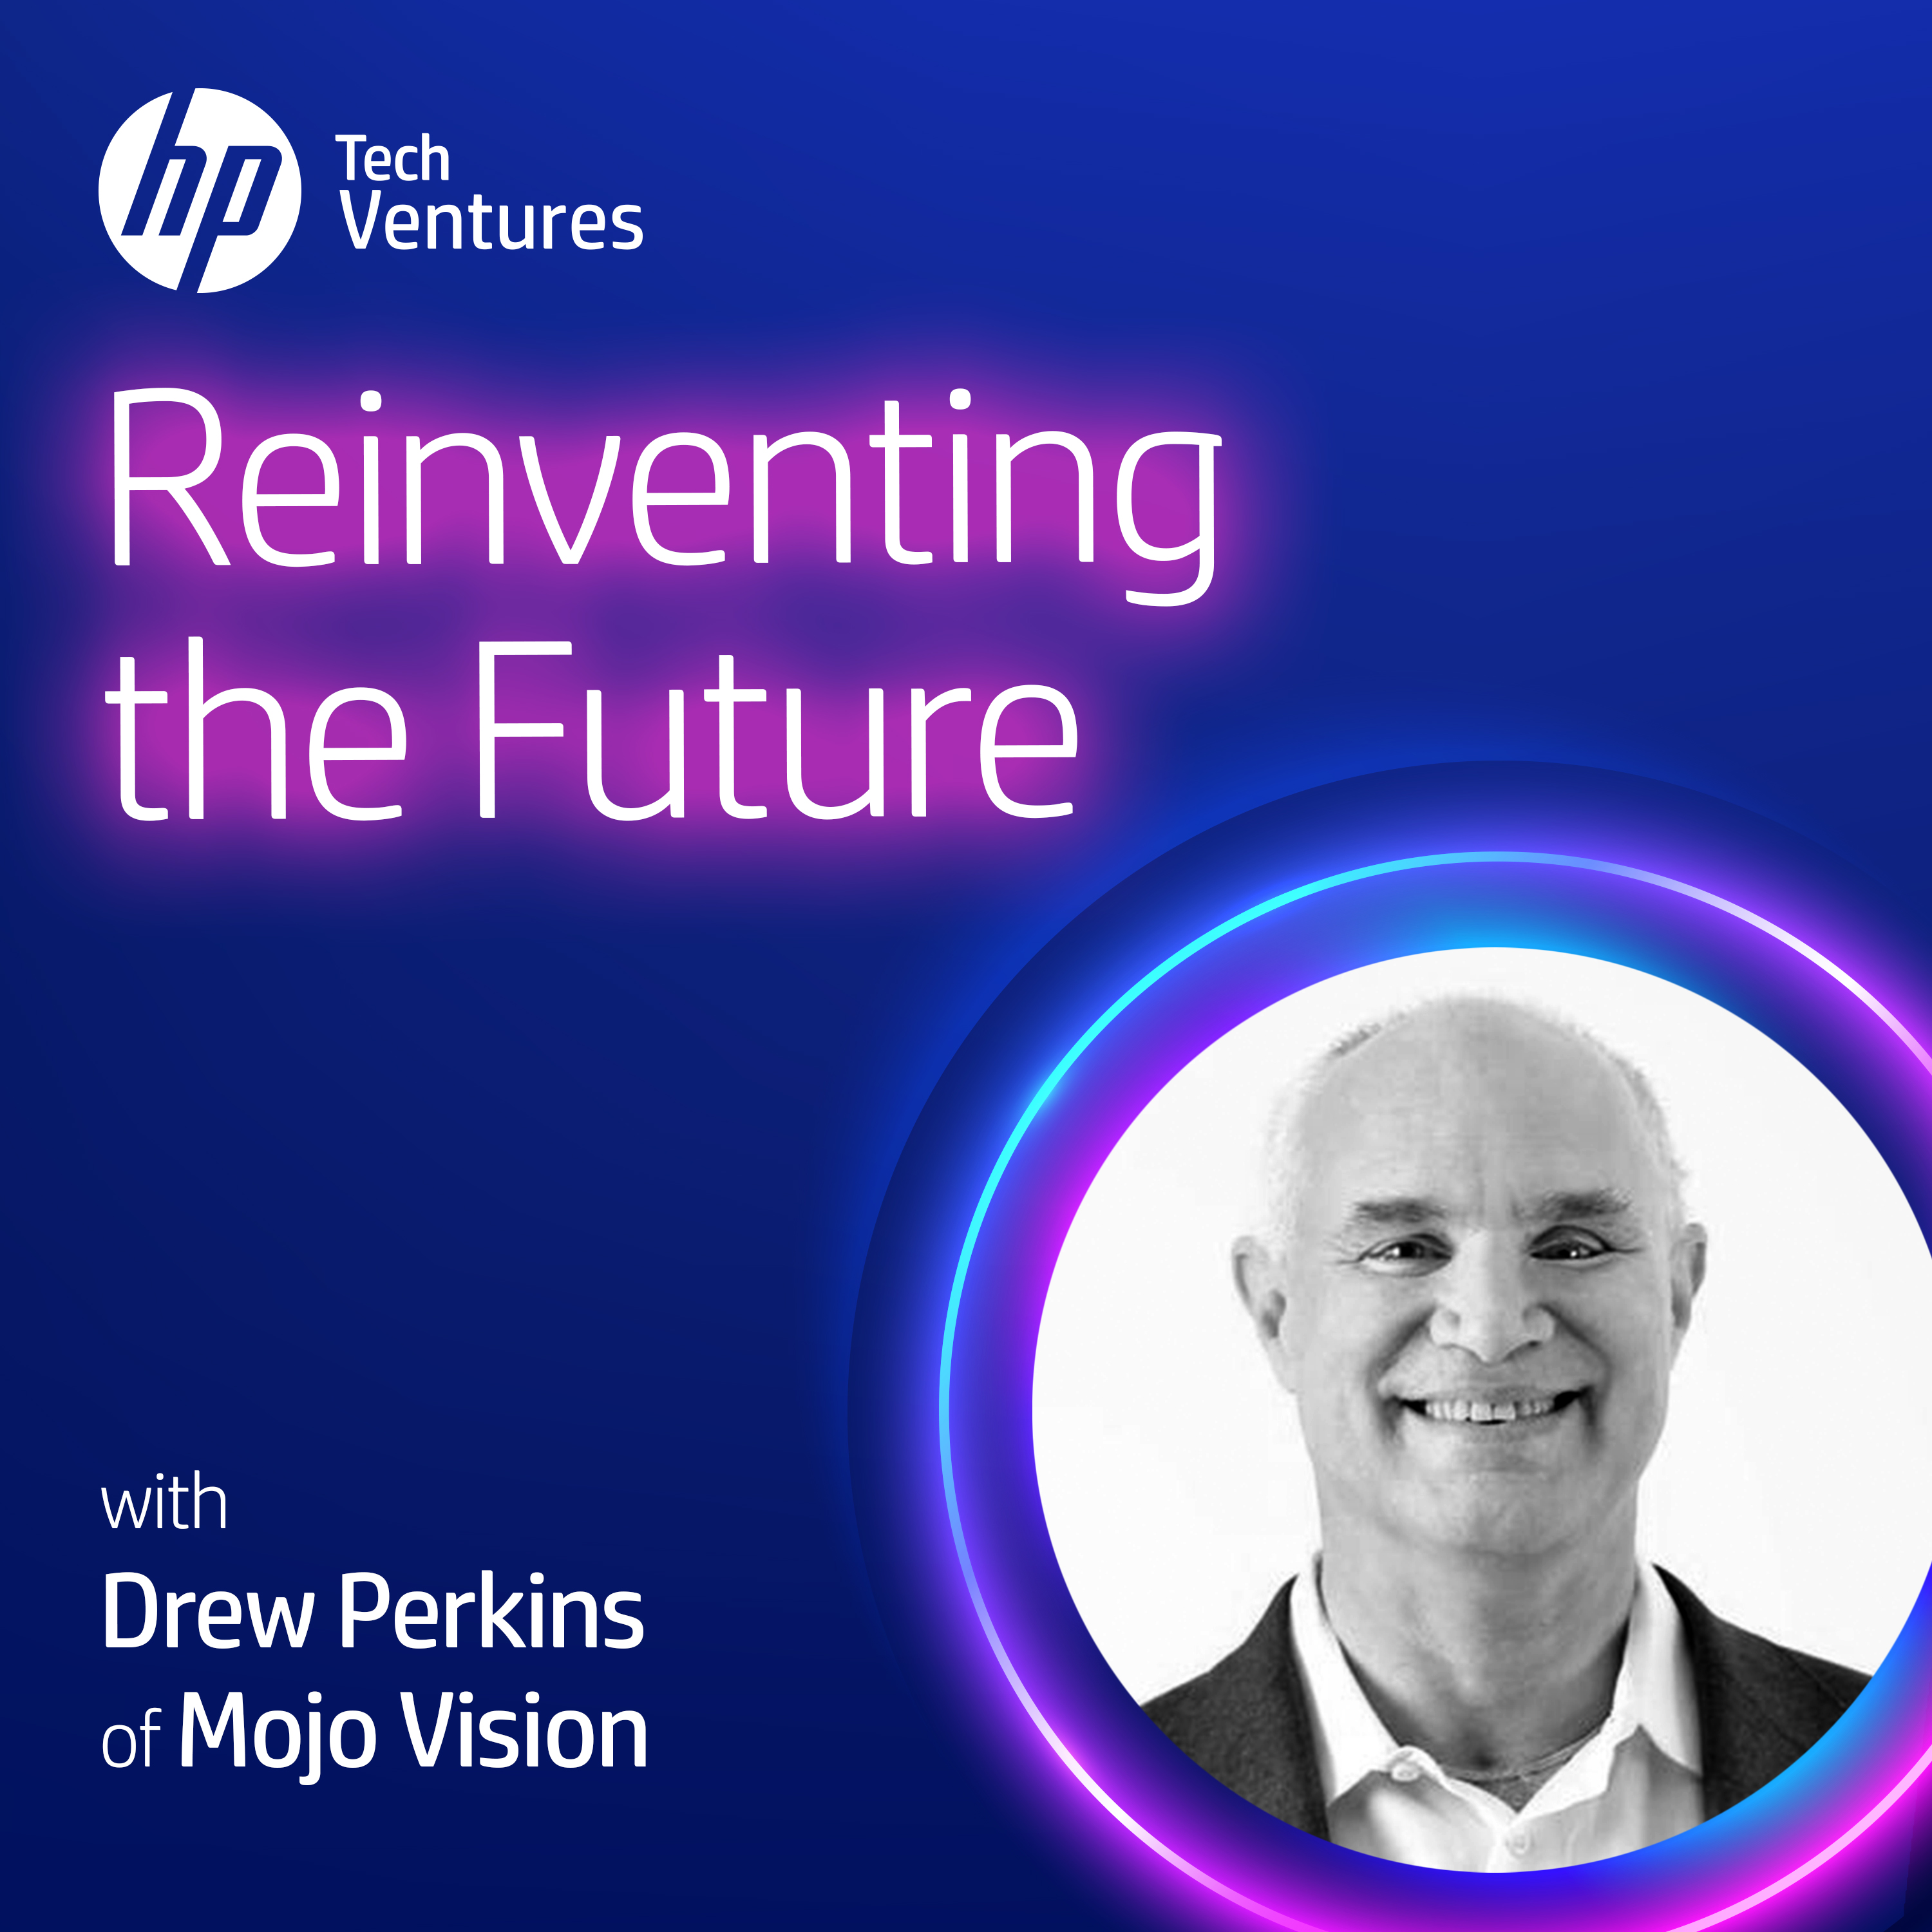 Reinventing the Future Podcast interview with Drew Perkins of Mojo Vision